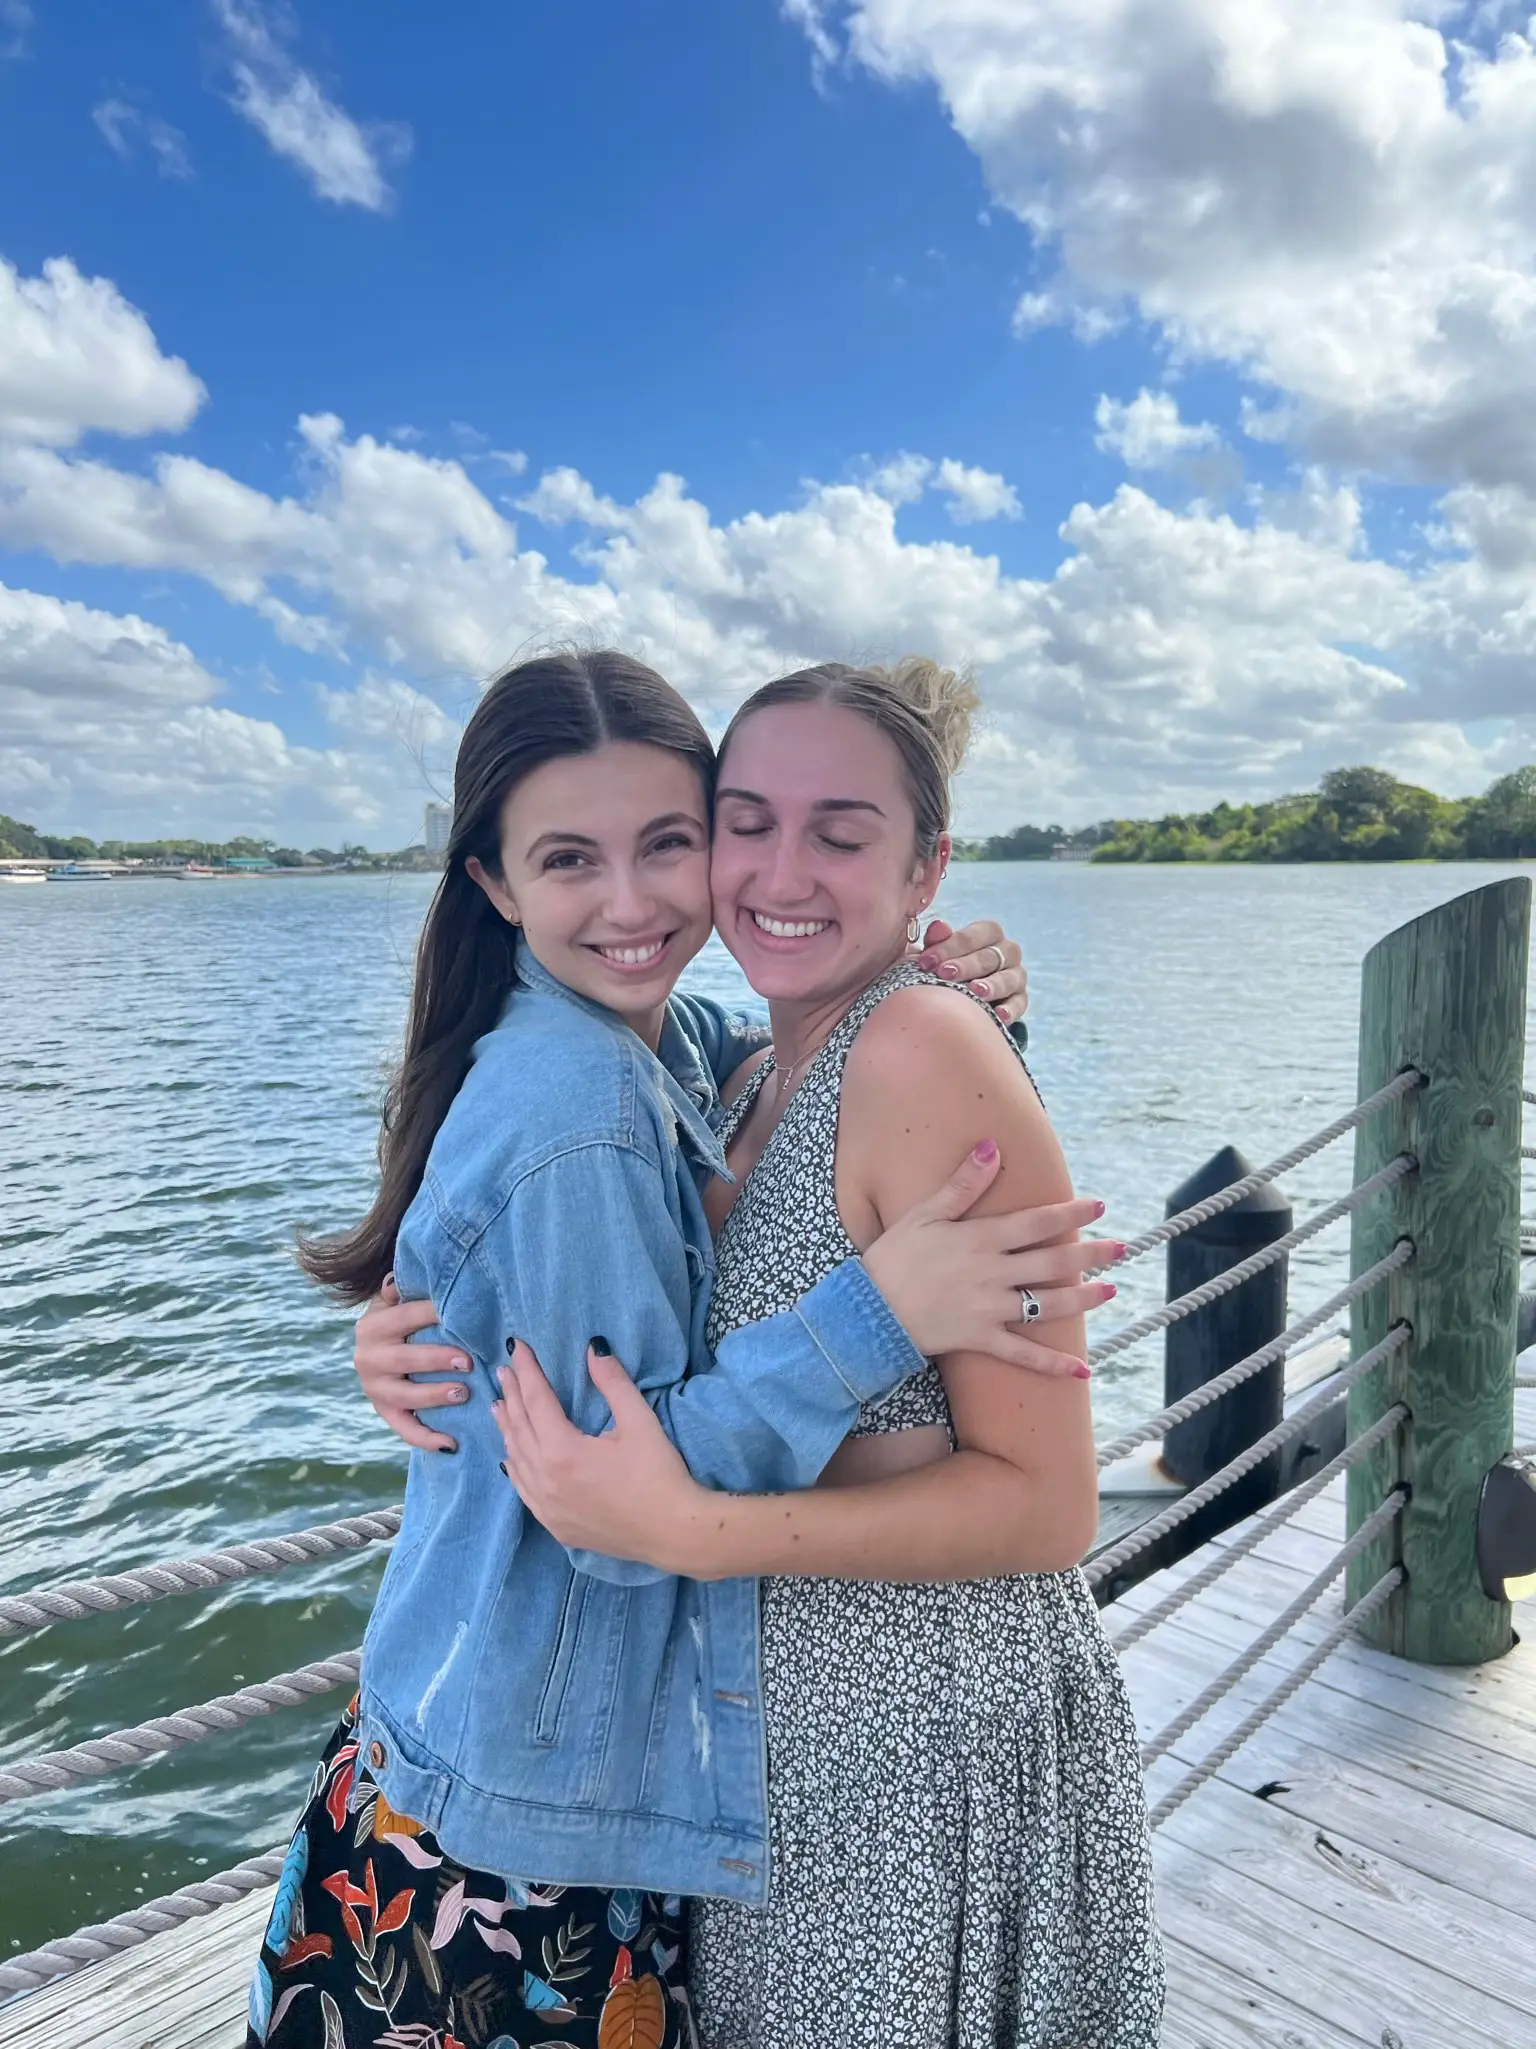  Two women are hugging each other on a pier overlooking the ocean.